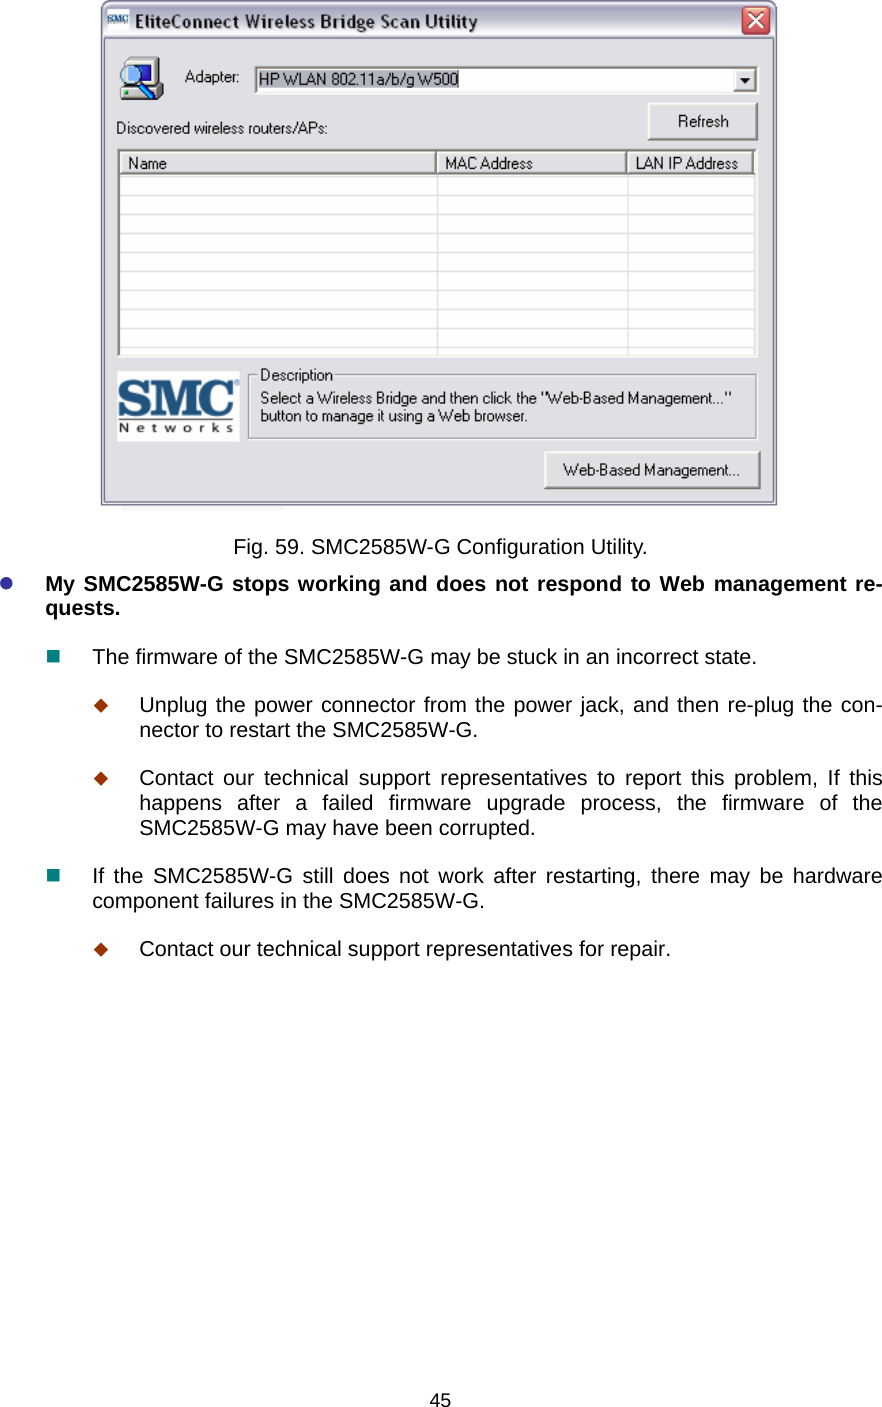   45 Fig. 59. SMC2585W-G Configuration Utility. z My SMC2585W-G stops working and does not respond to Web management re-quests.  The firmware of the SMC2585W-G may be stuck in an incorrect state.  Unplug the power connector from the power jack, and then re-plug the con-nector to restart the SMC2585W-G.  Contact our technical support representatives to report this problem, If this happens after a failed firmware upgrade process, the firmware of the SMC2585W-G may have been corrupted.  If the SMC2585W-G still does not work after restarting, there may be hardware component failures in the SMC2585W-G.  Contact our technical support representatives for repair. 